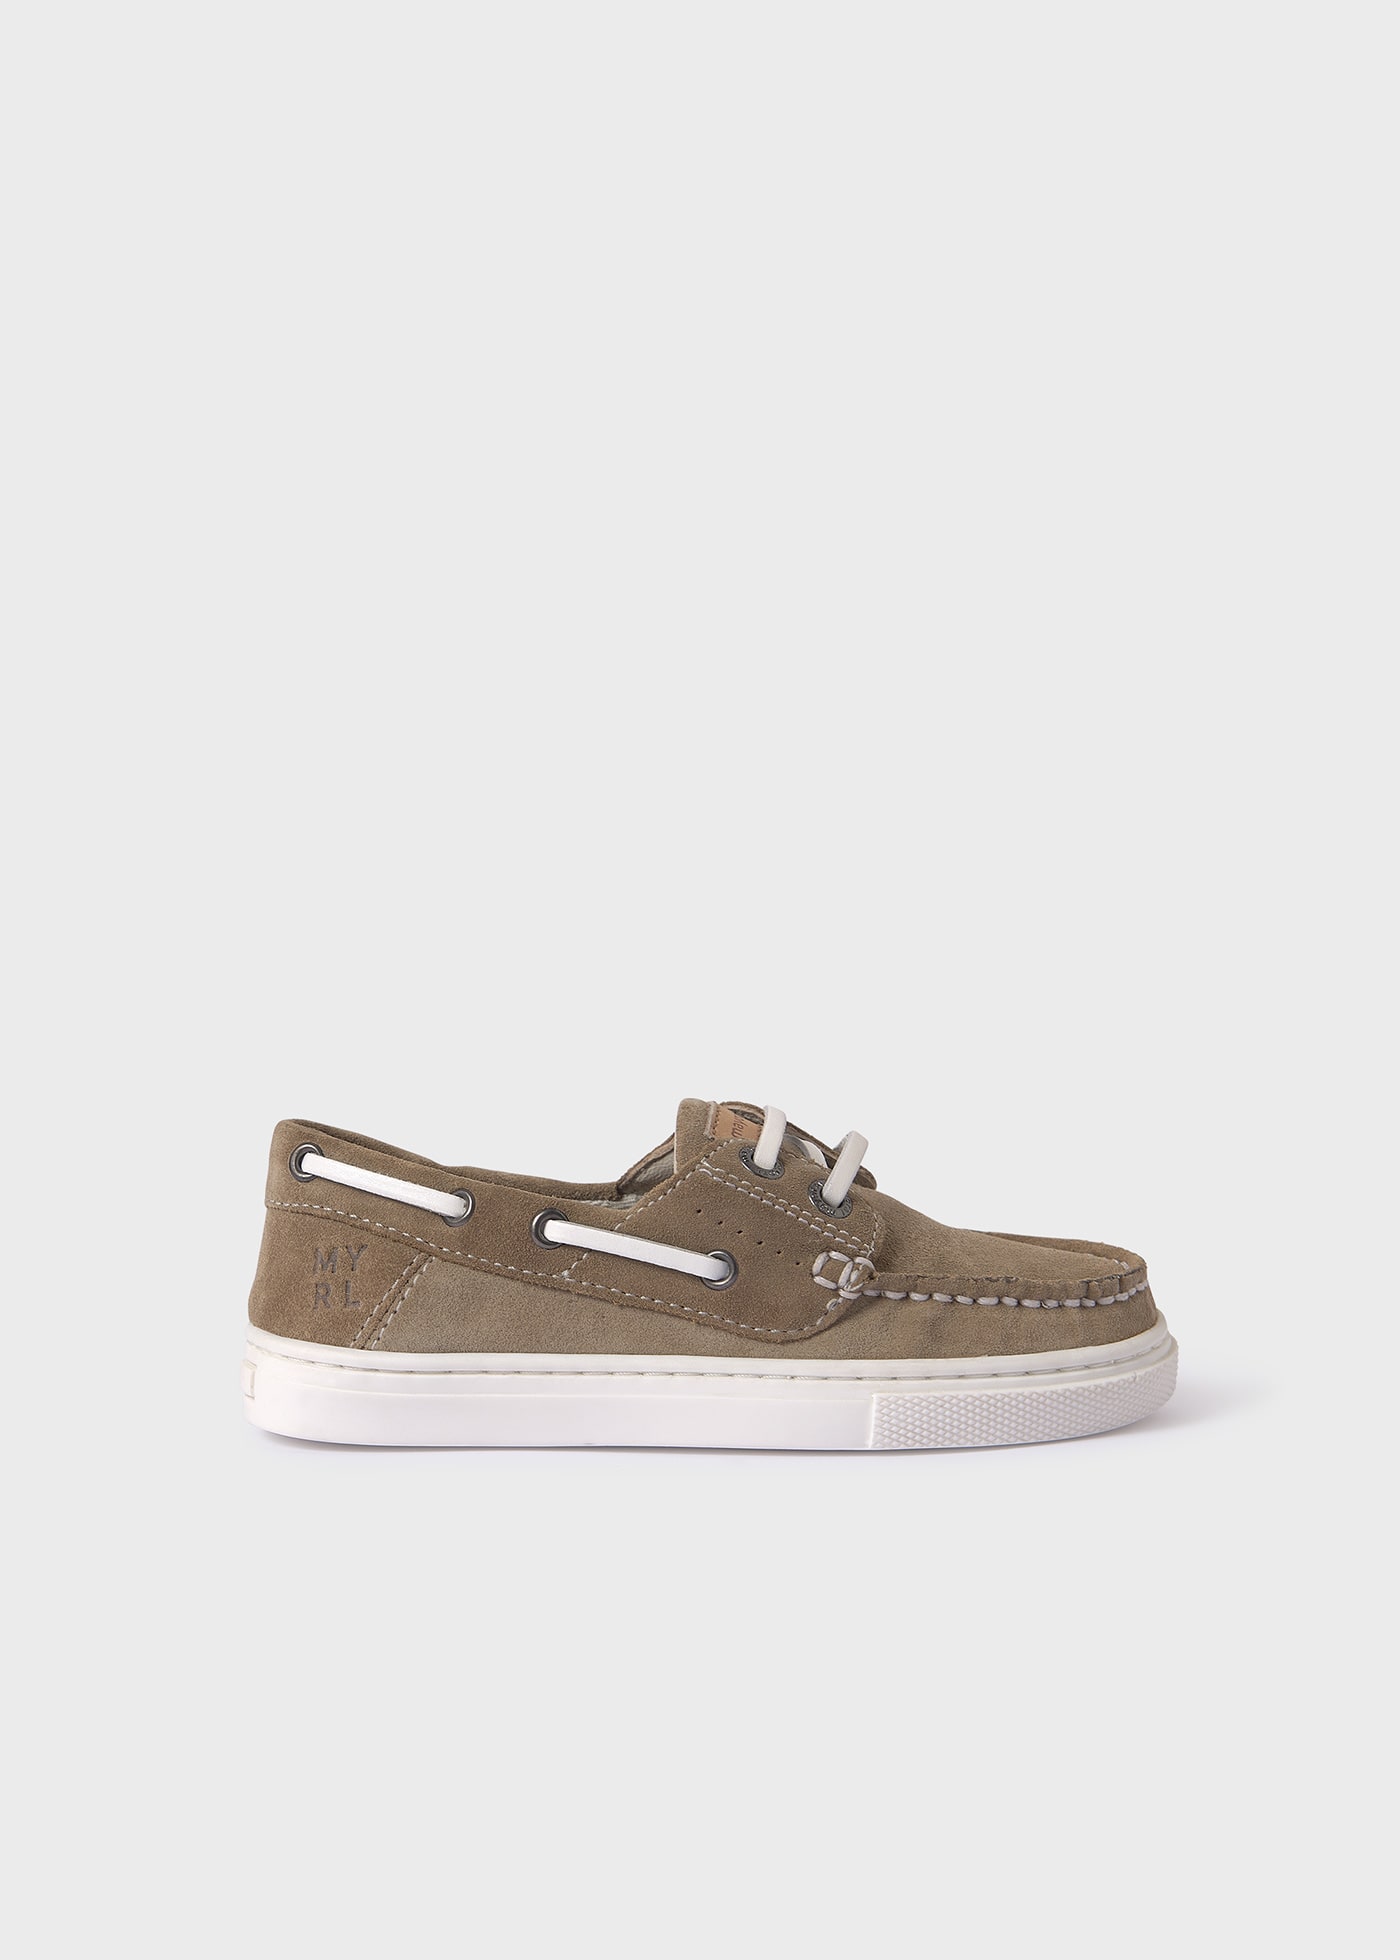 Boys boat shoes sustainable leather